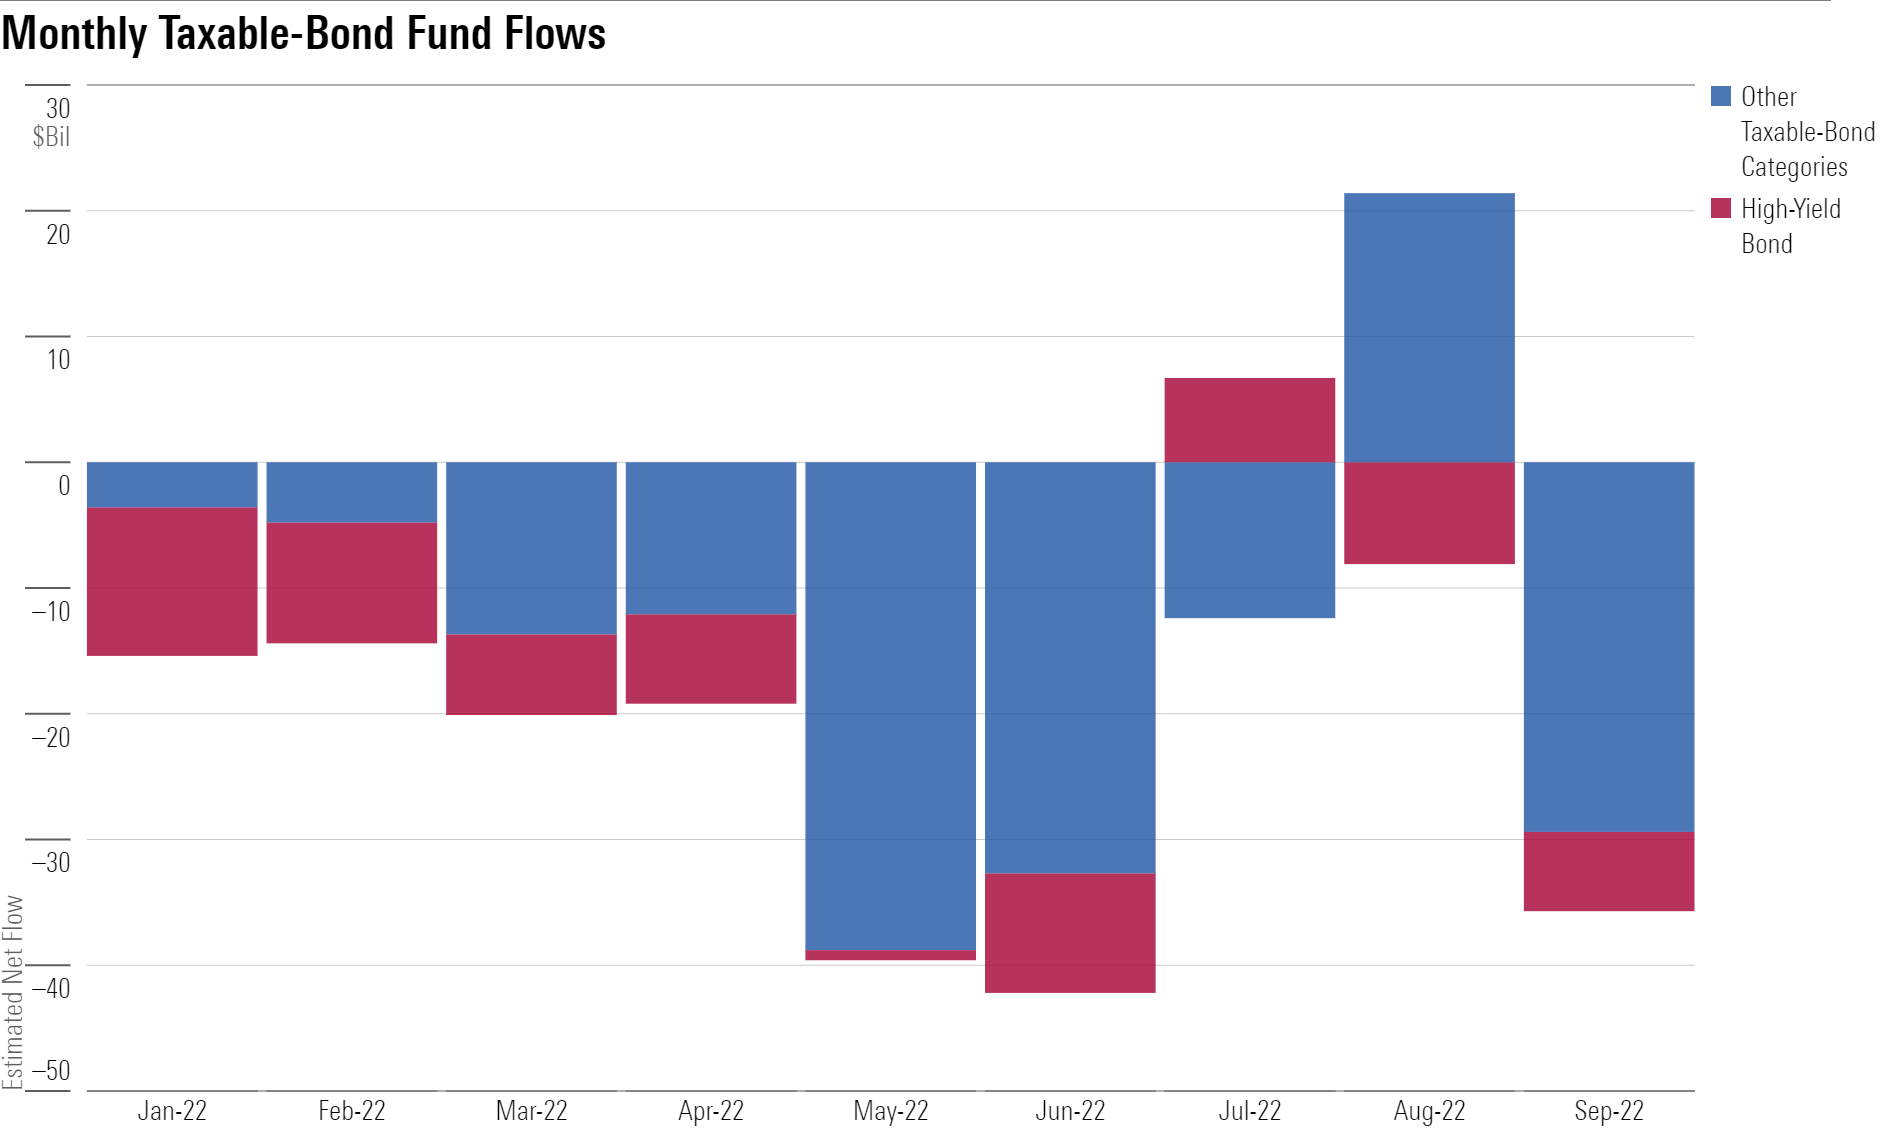 Aversion to risk helped drive about $36 billion out of taxable-bond funds in September. The bank-loan, high-yield bond, and intermediate core-plus bond categories punctuated a difficult quarter with over $5 billion of outflows each.